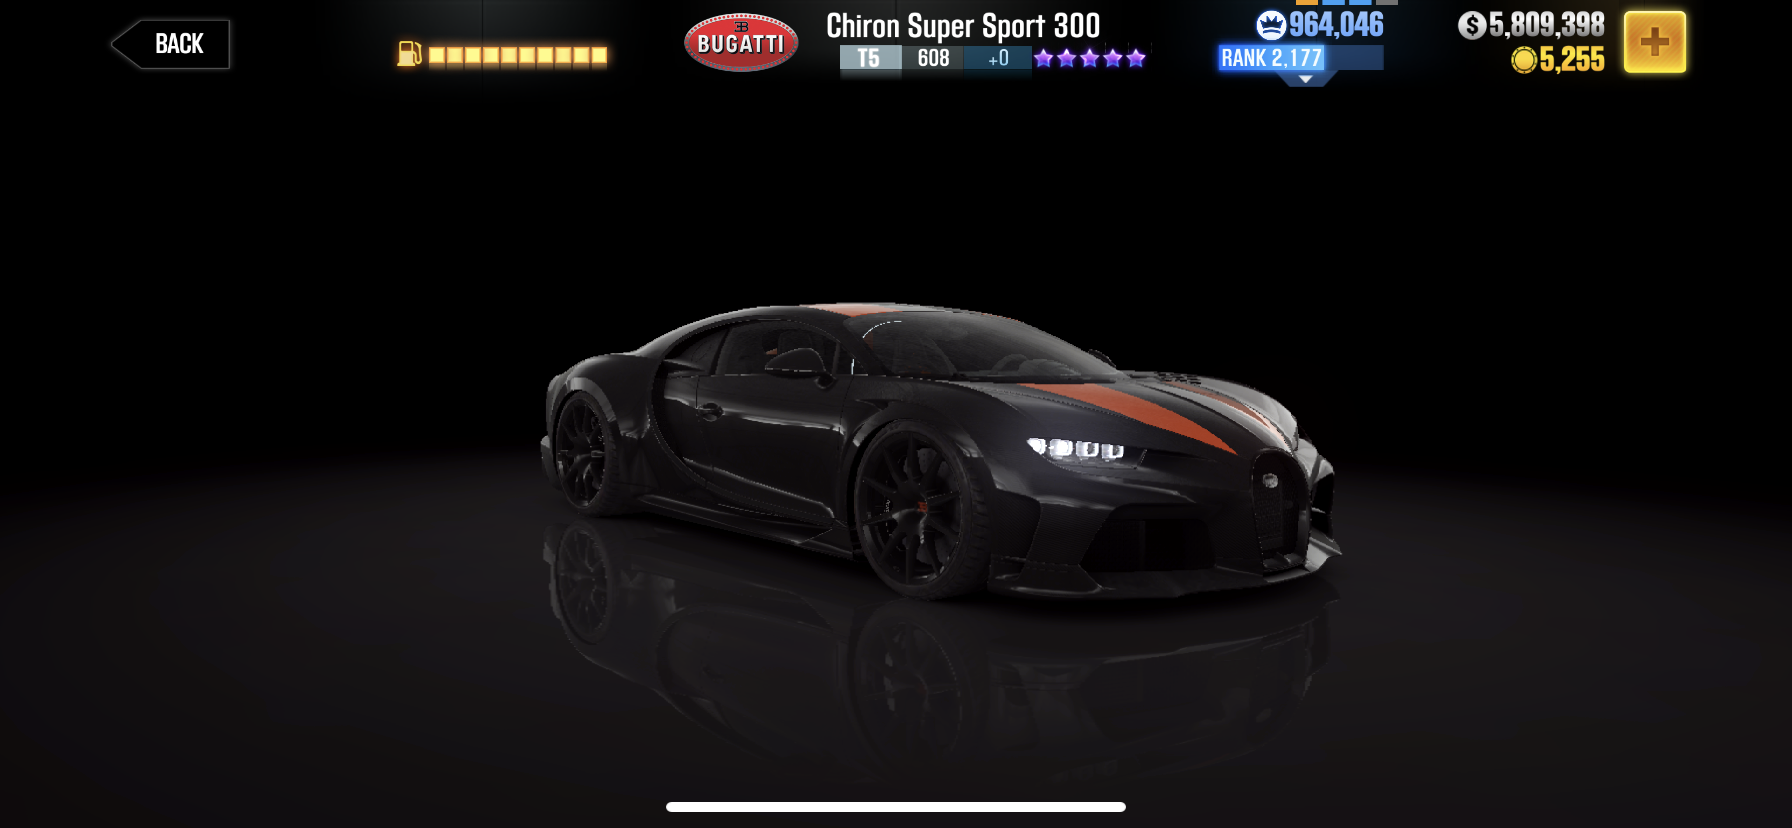 https://static.wikia.nocookie.net/csrracing/images/c/ca/CSR2_Chiron_300.png/revision/latest?cb=20200702183701